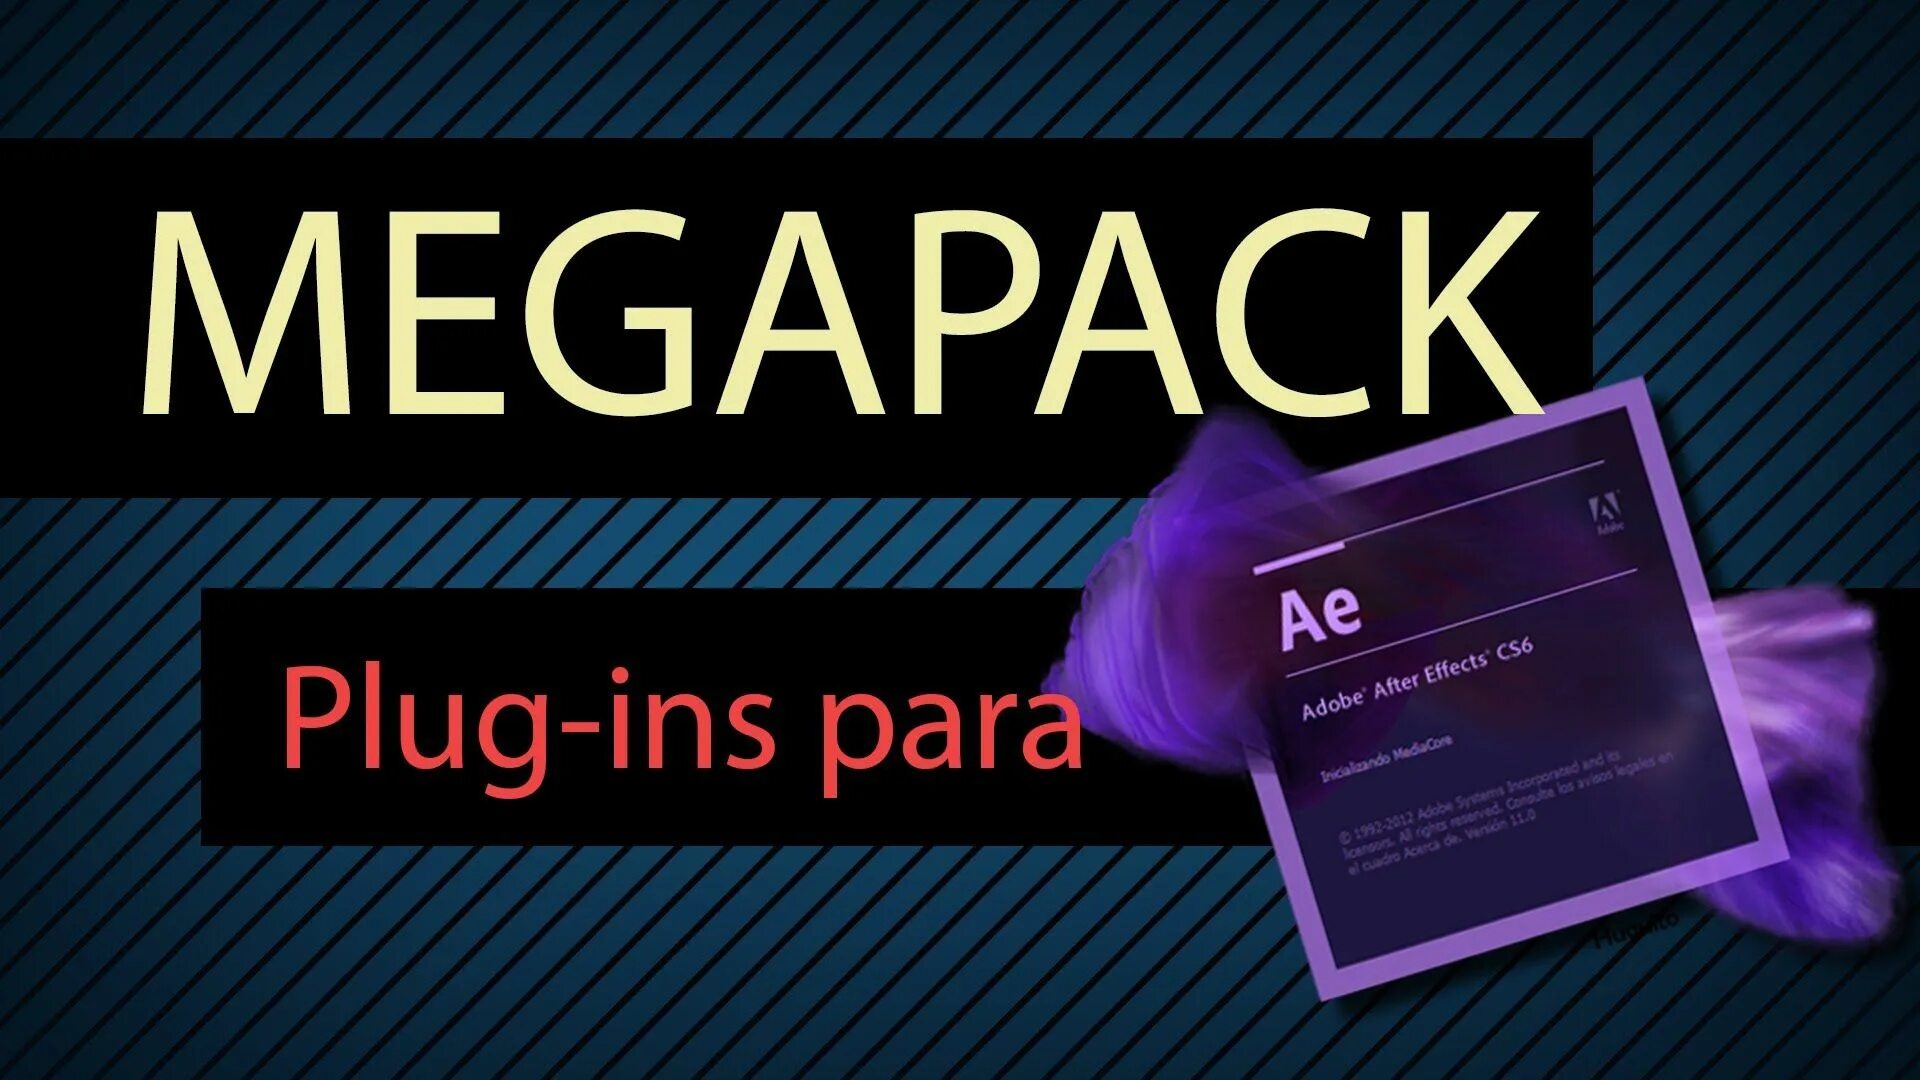 After Effects Plugins. Adobe after Effects. Паки after Effects. Плагины для Афтер эффект. Ae plugins